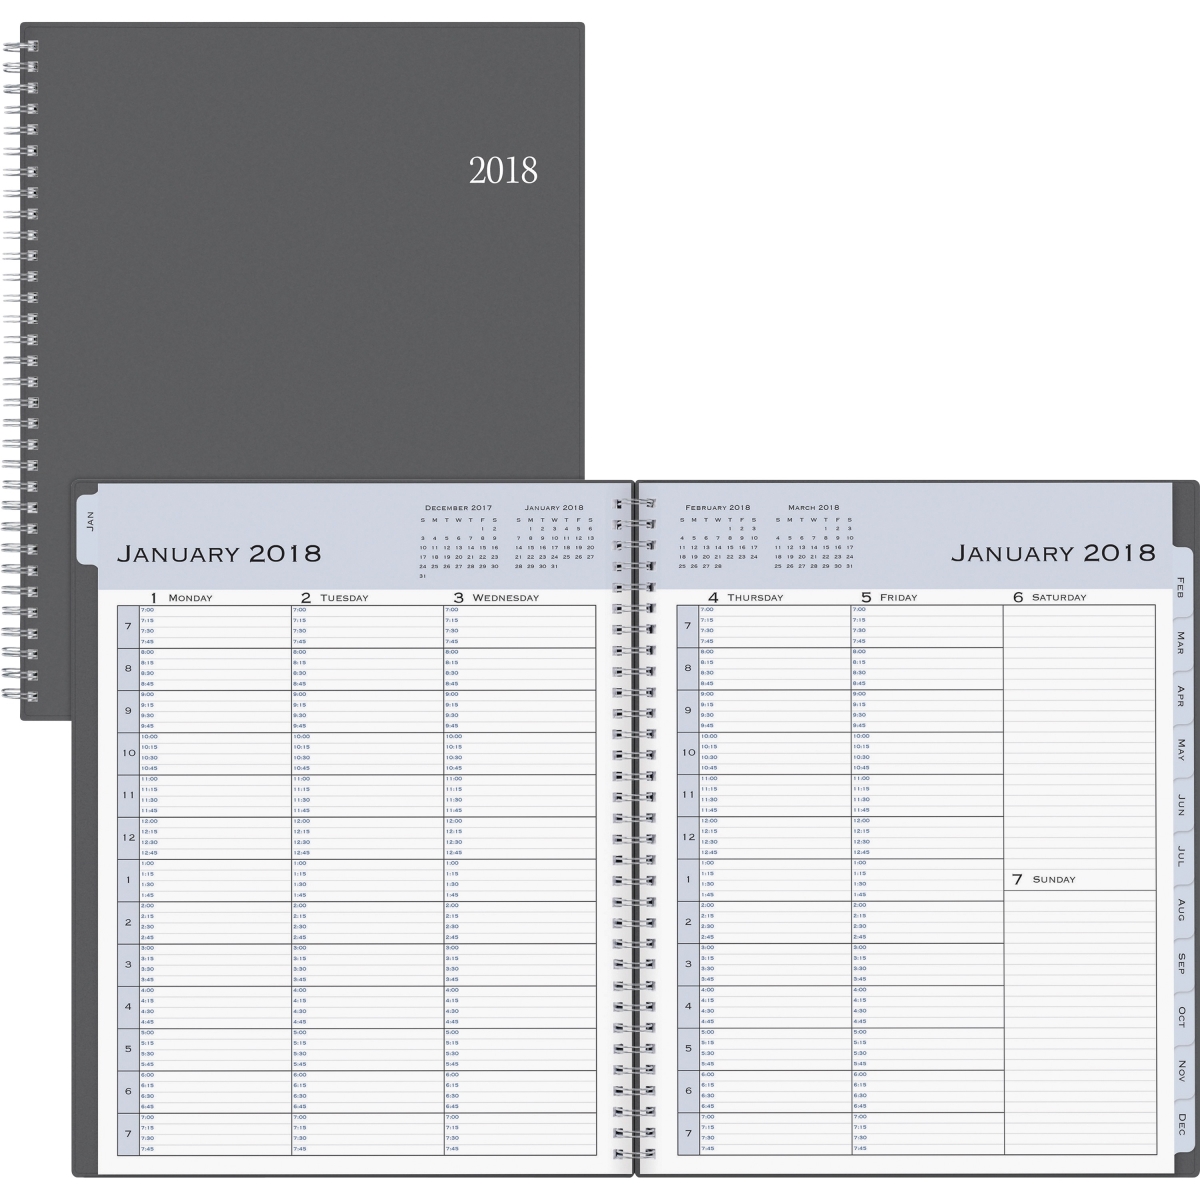 Blue Sky 100009 Passages Appointment Book Planner, Black